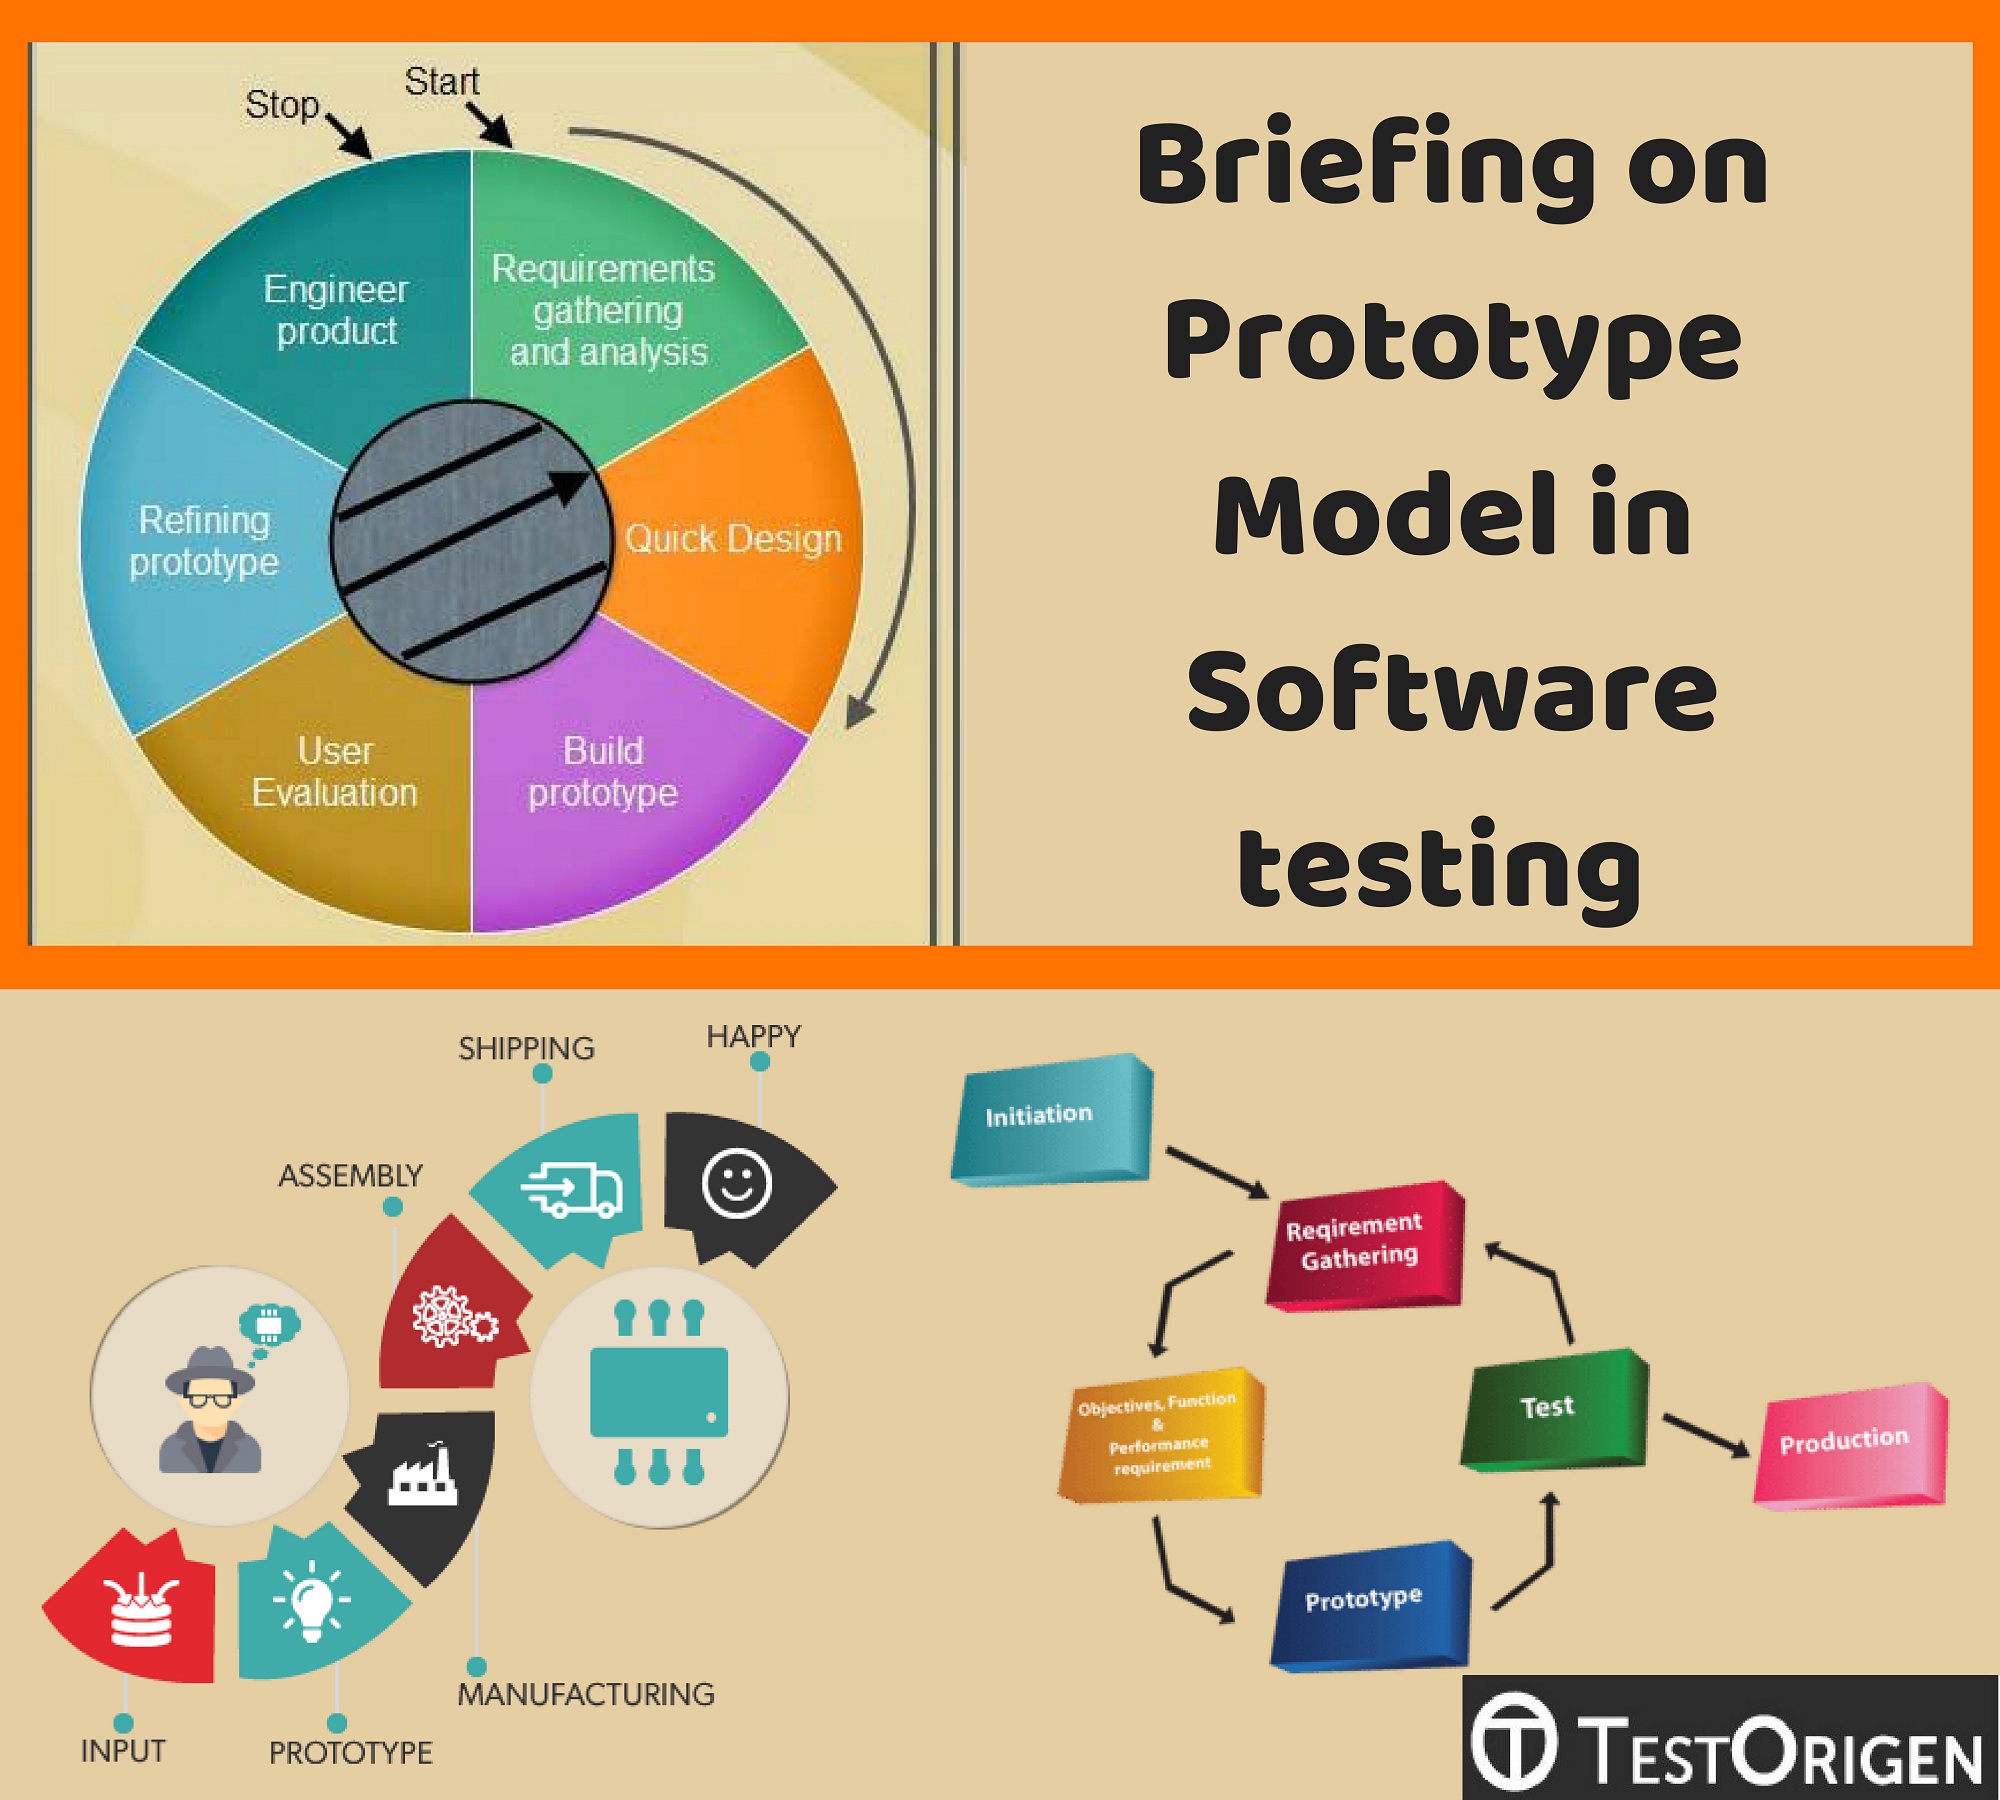 Briefing on Prototype Model in Software Testing | Software testing